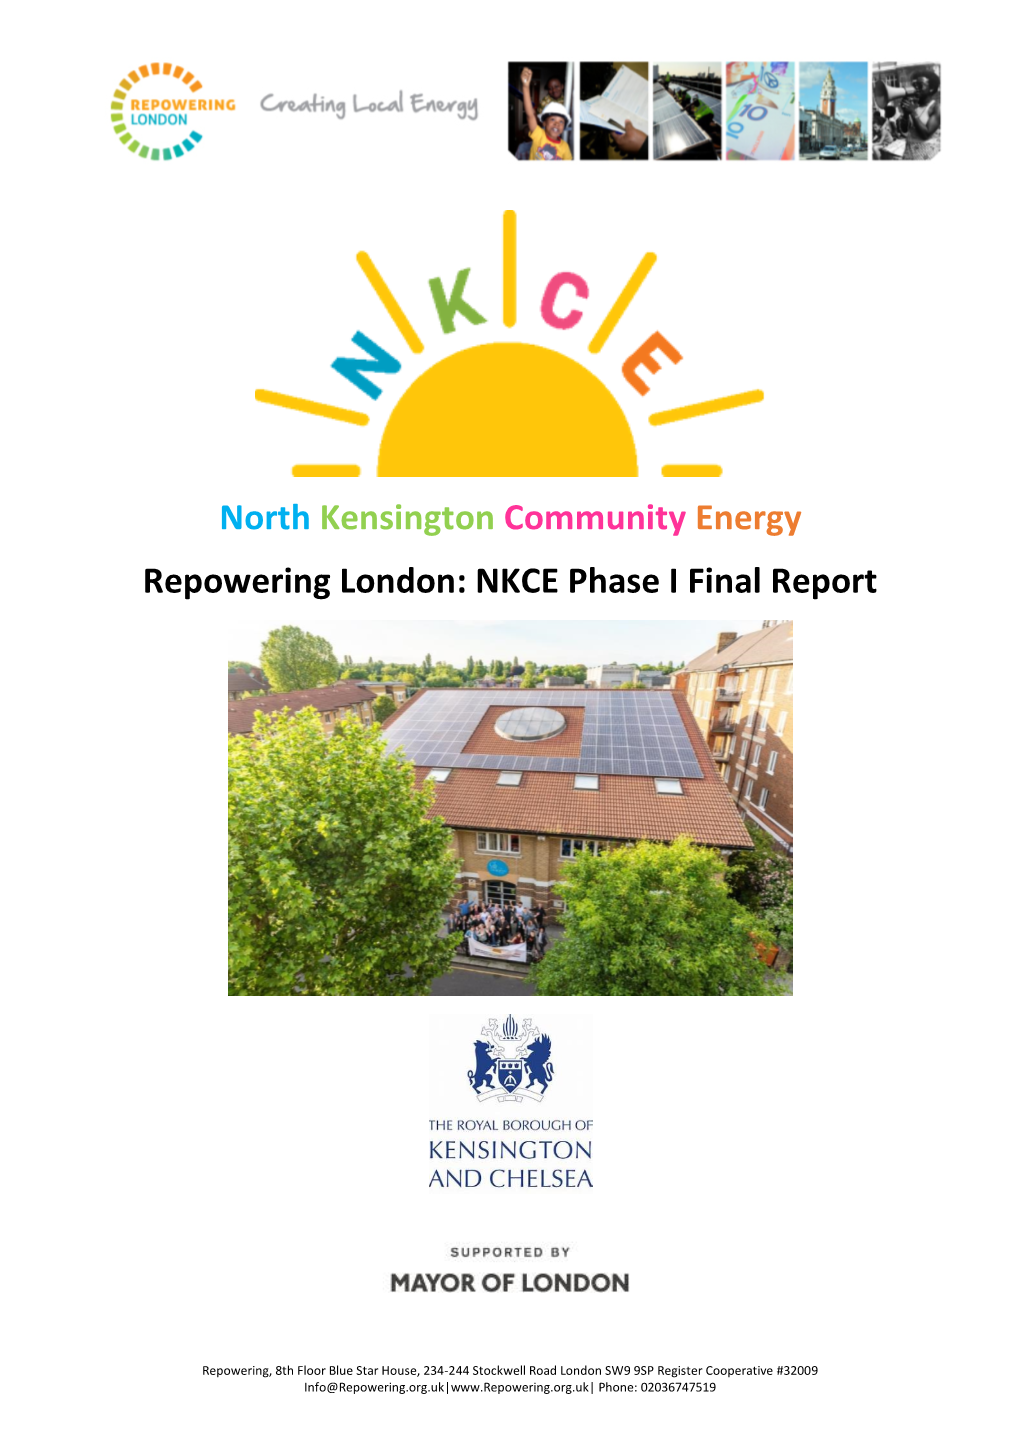 North Kensington Community Energy Repowering London: NKCE Phase I Final Report